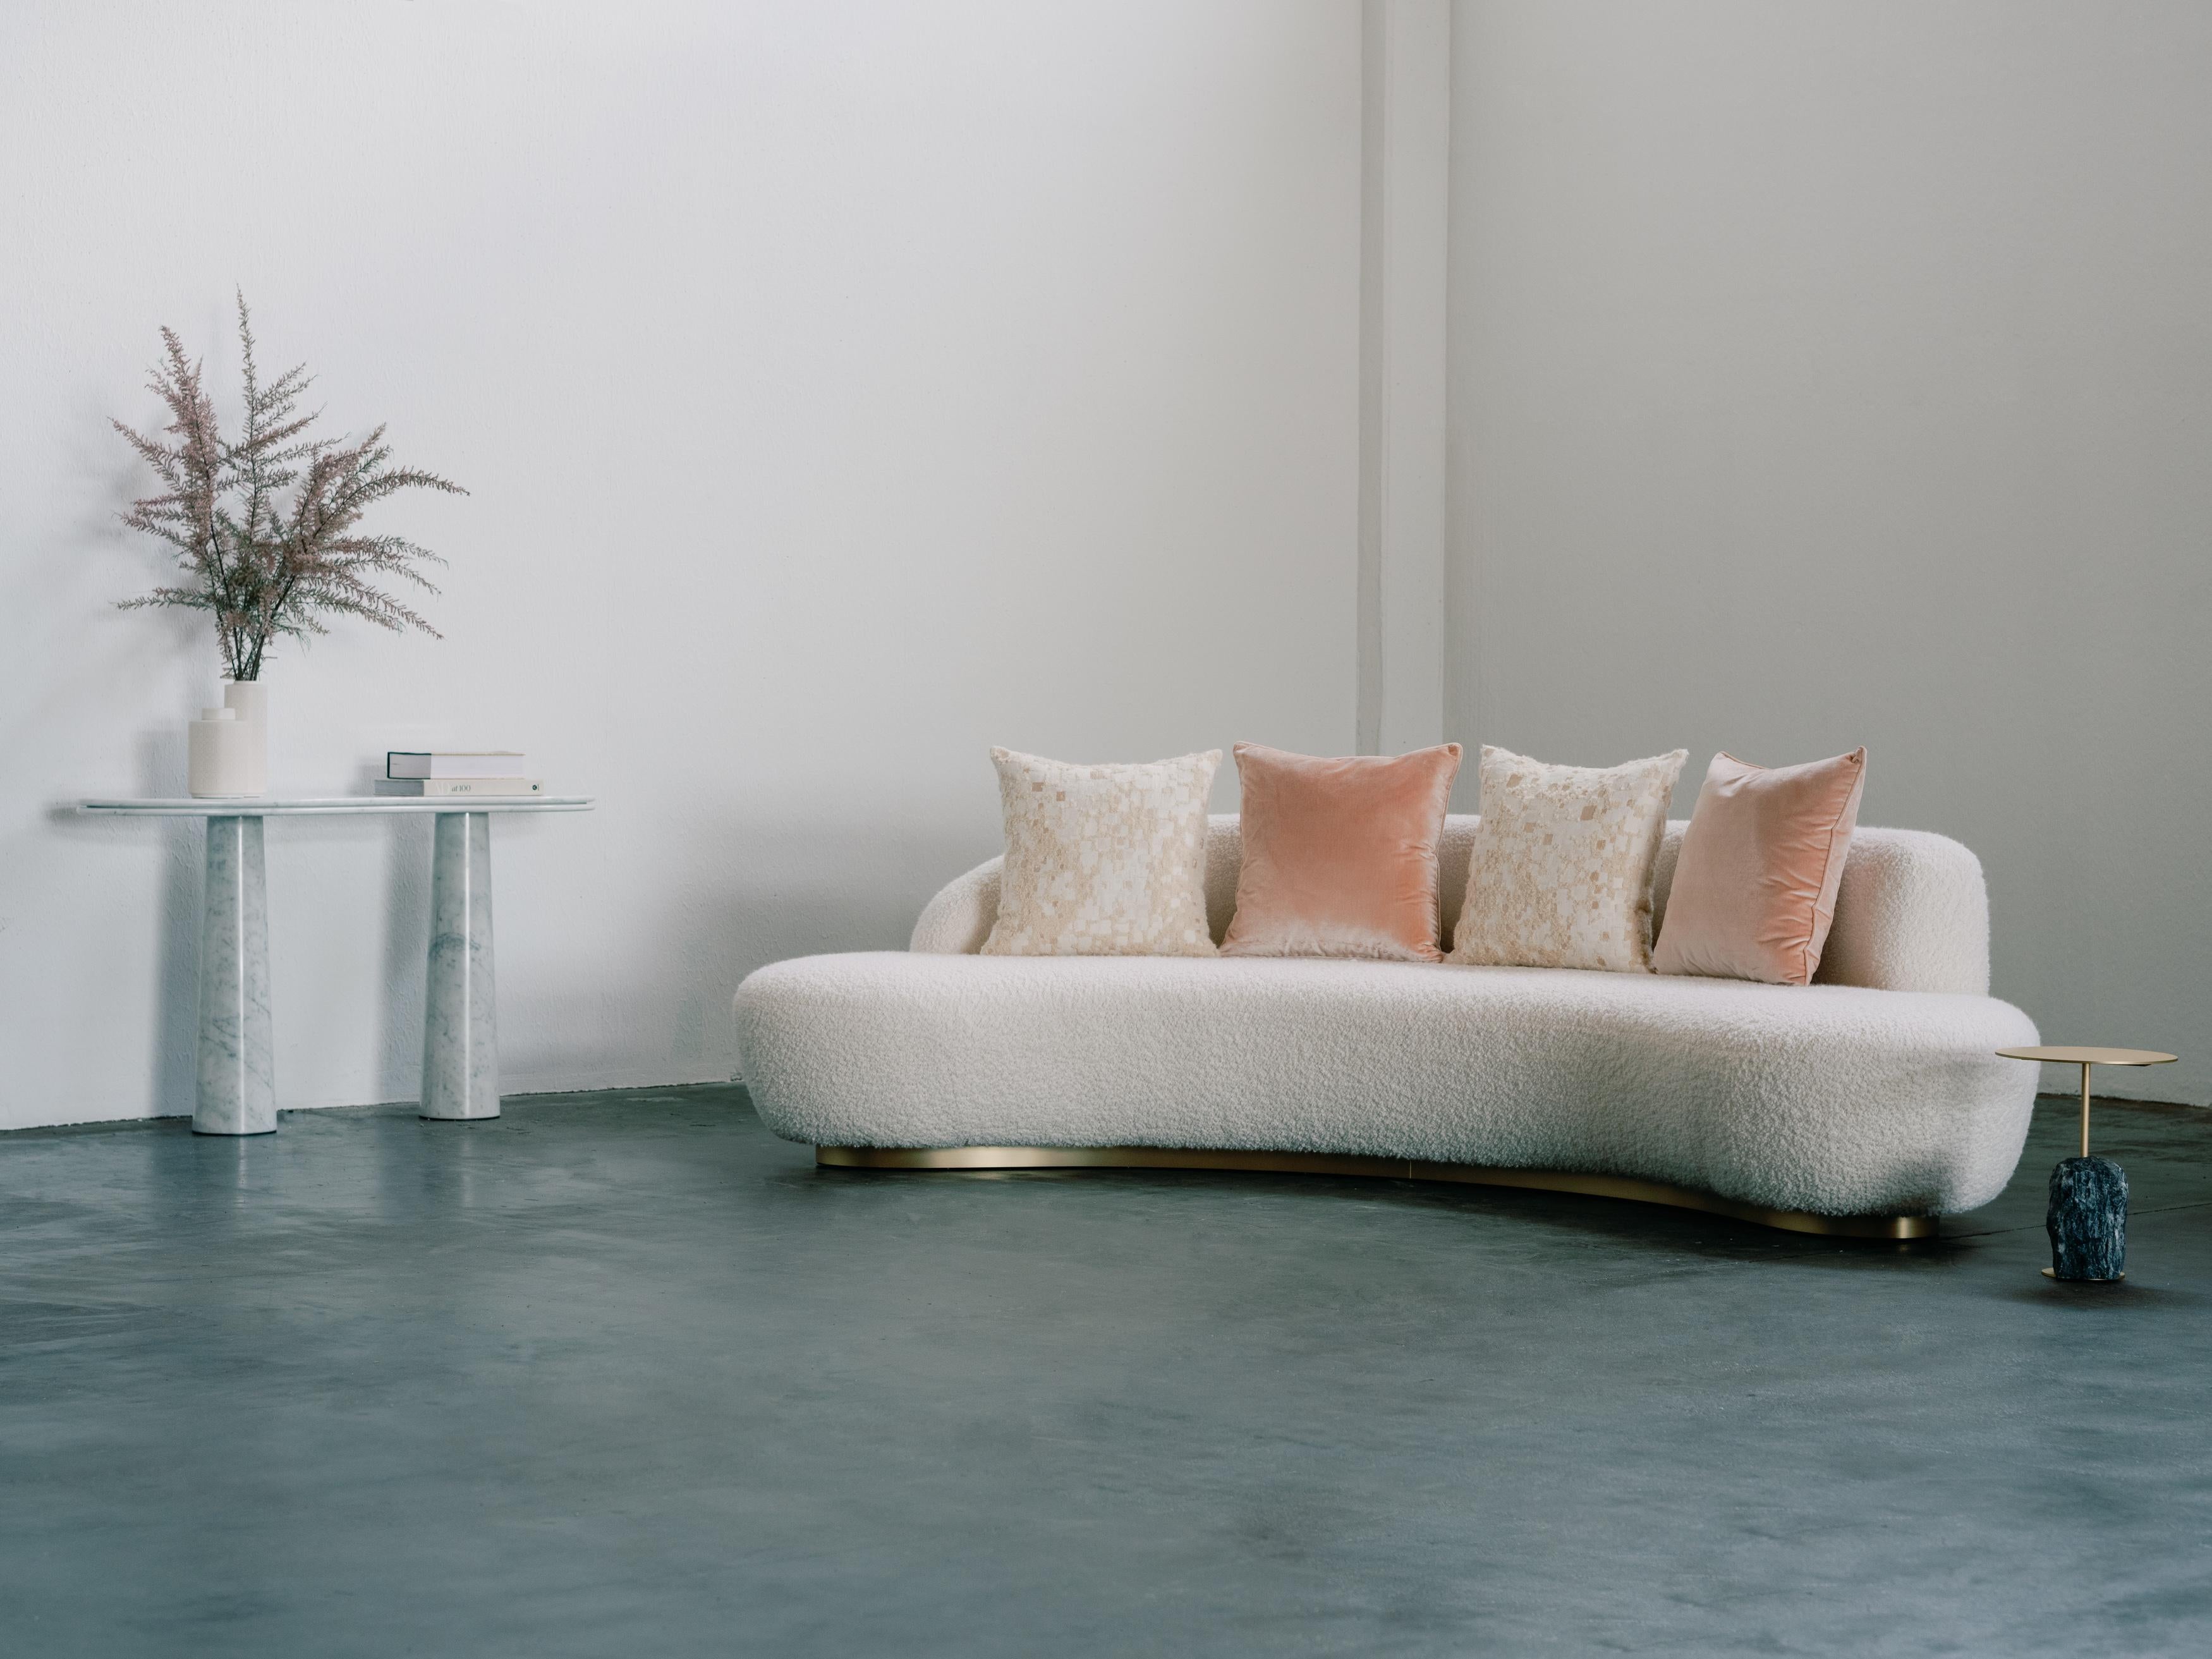 Arc sofa, contemporary collection, handcrafted in Portugal - Europe by Greenapple.

A masterfully crafted sofa whose robust wooden structure and high-quality memory foam retain their shape even with frequent use. Arc is upholstered in cream